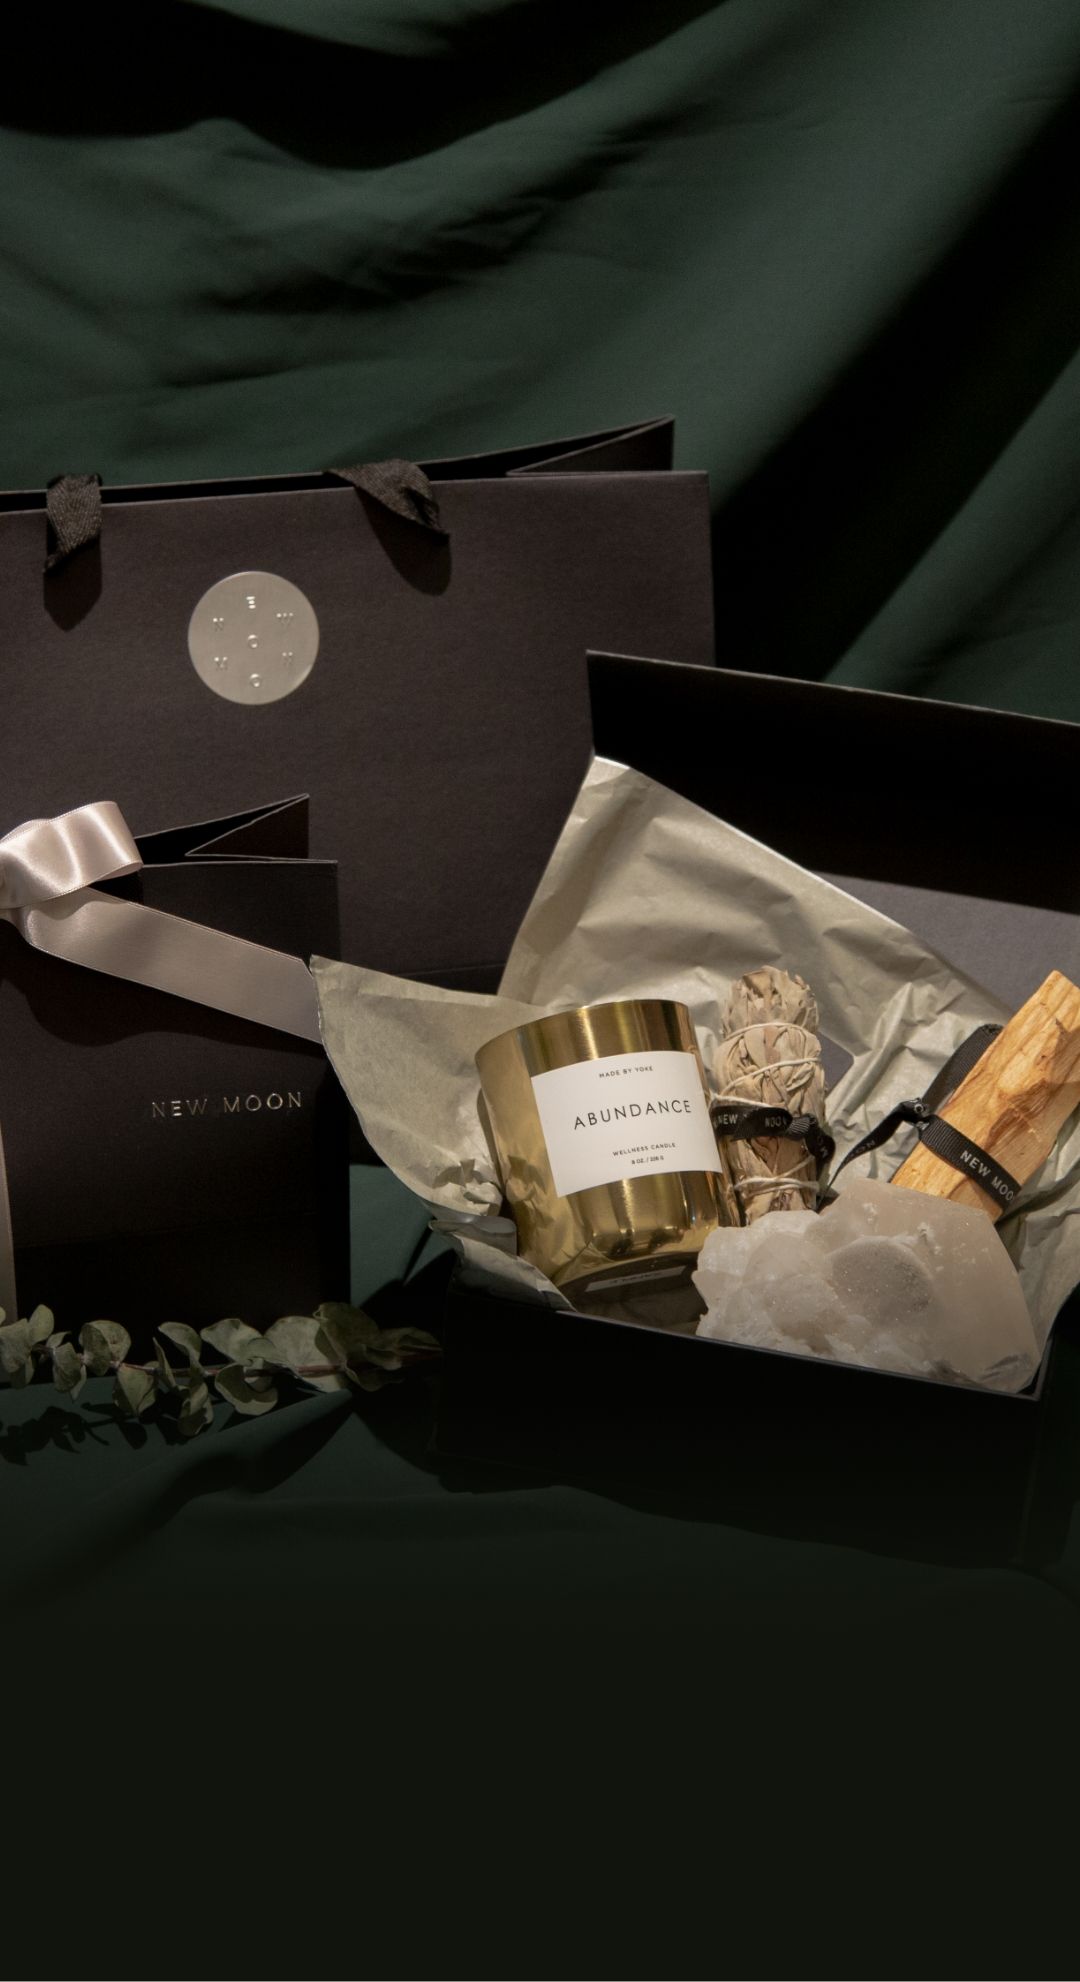 The New Moon Christmas gift packaging against dark green back drop